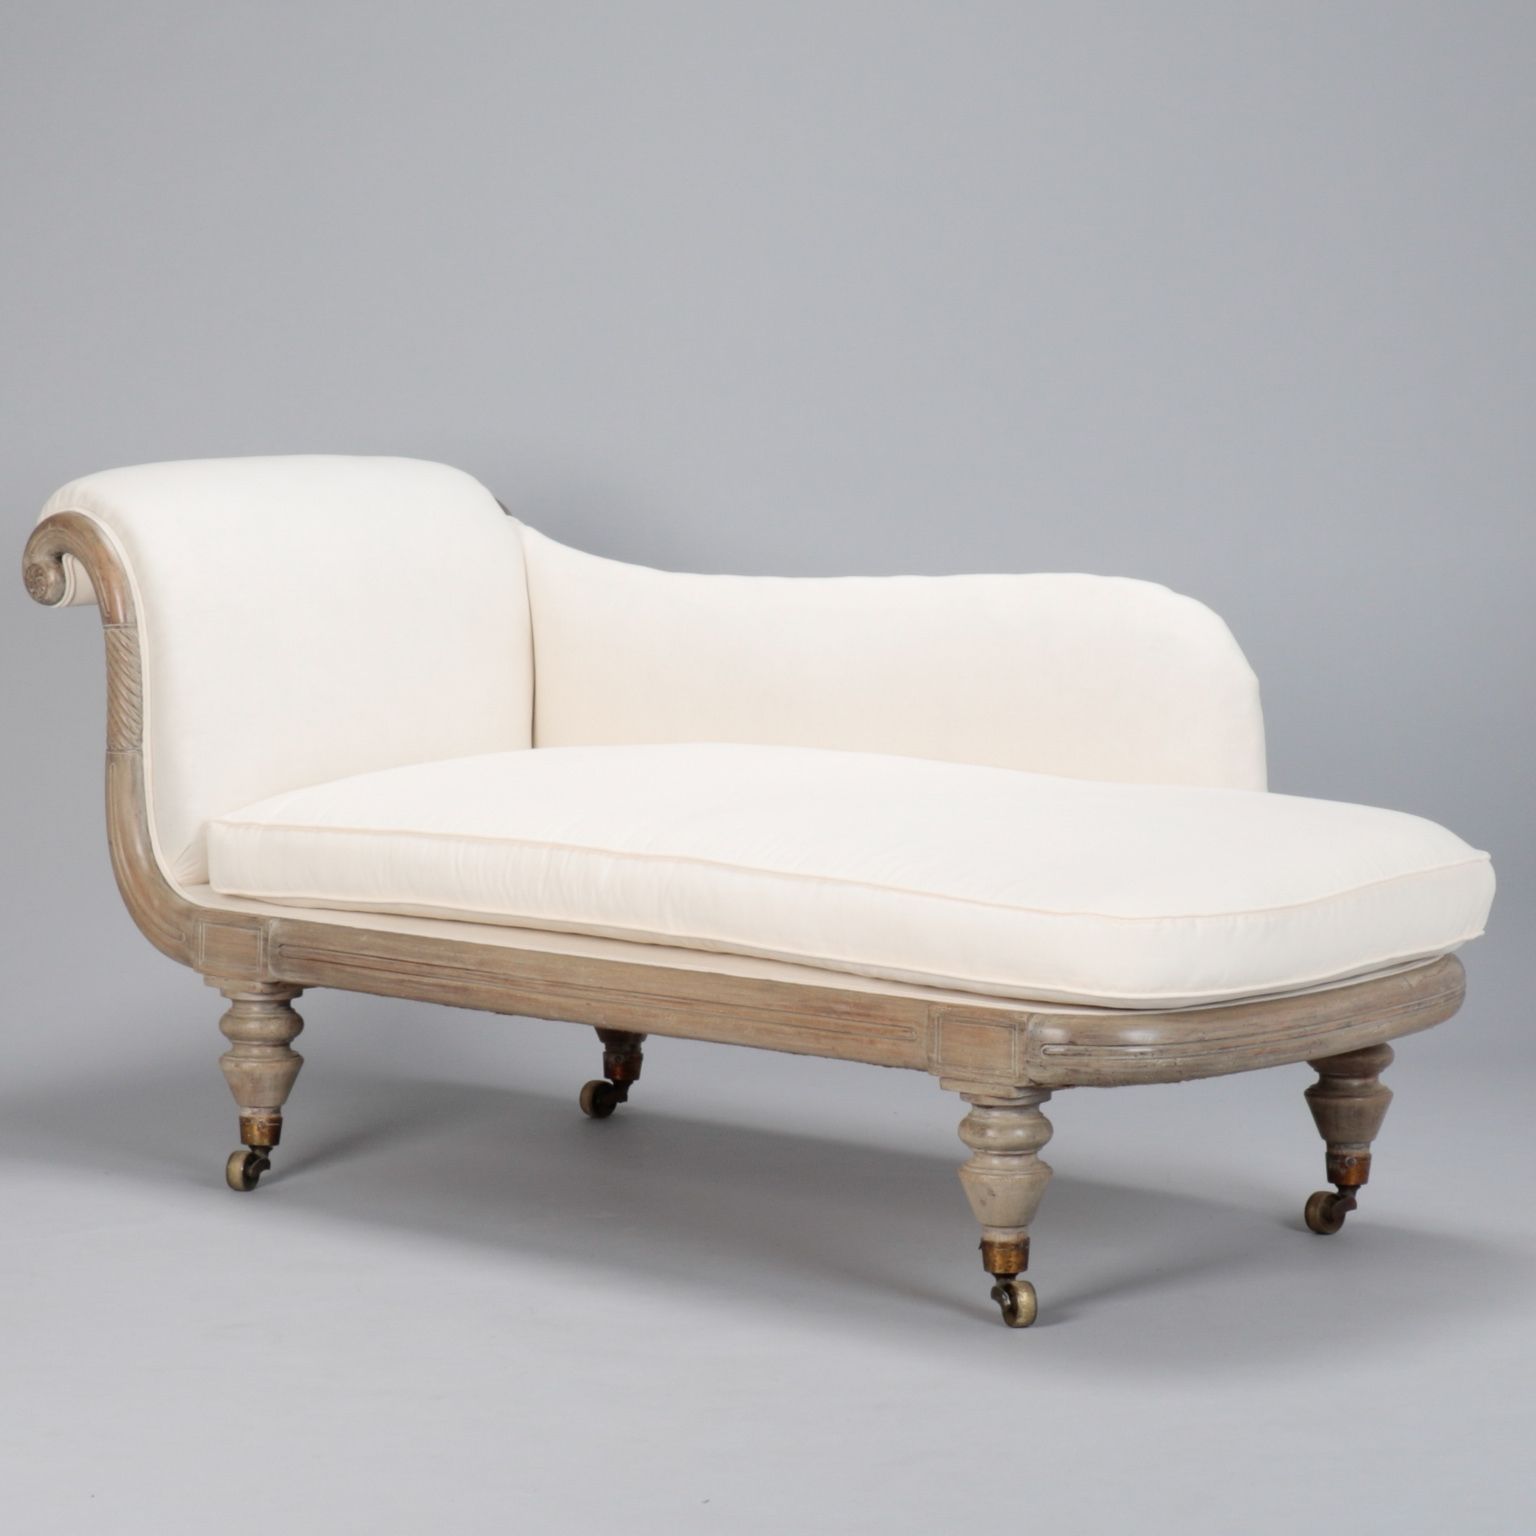 Most Popular French Chaise Lounge With Bleached Wood Frame – Item:7742 Throughout French Chaises (View 10 of 15)